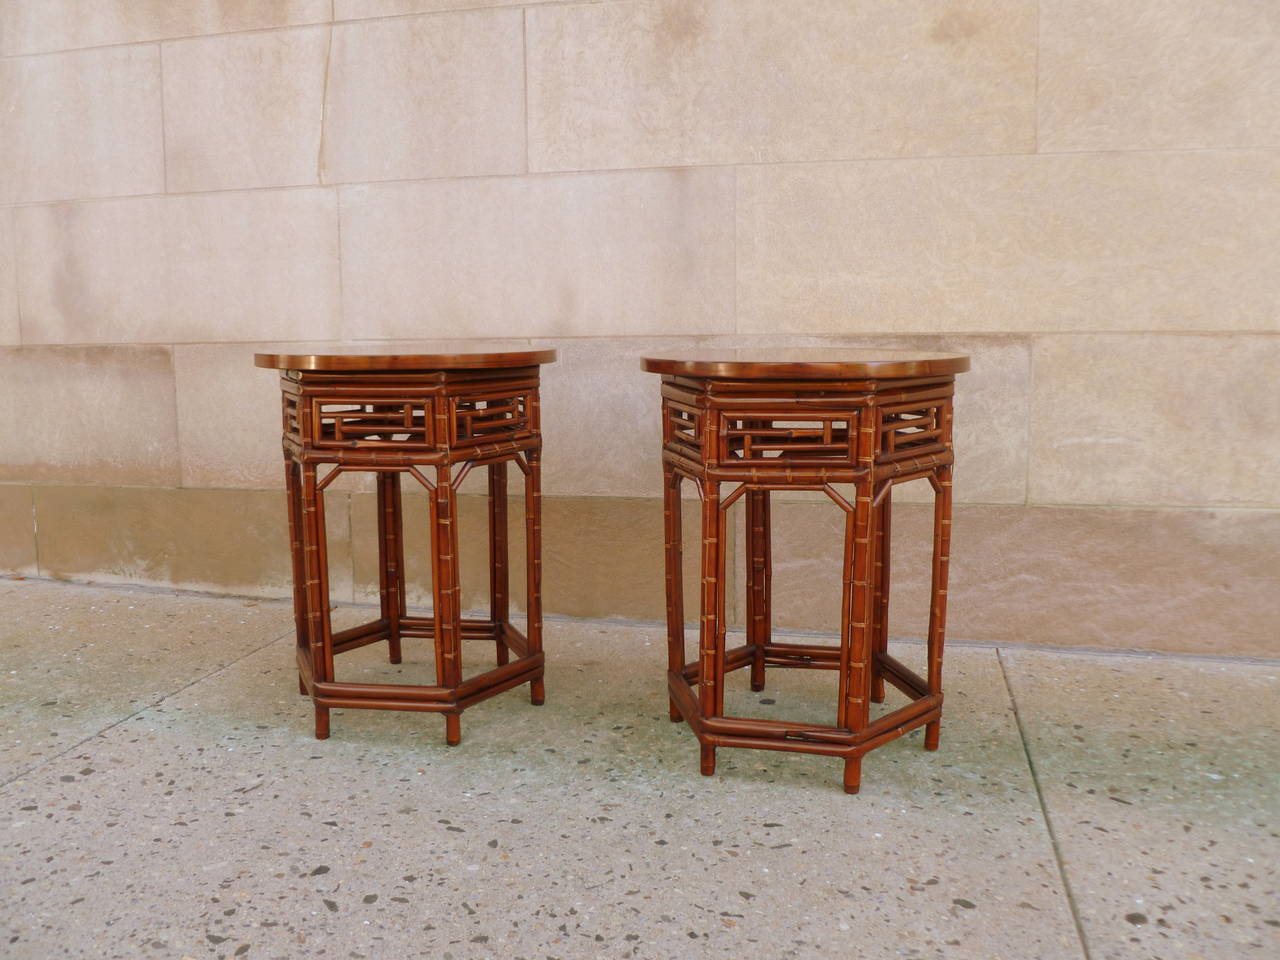 Fretwork A Pair Of Round Bamboo End Tables With Black Lacquer Tops